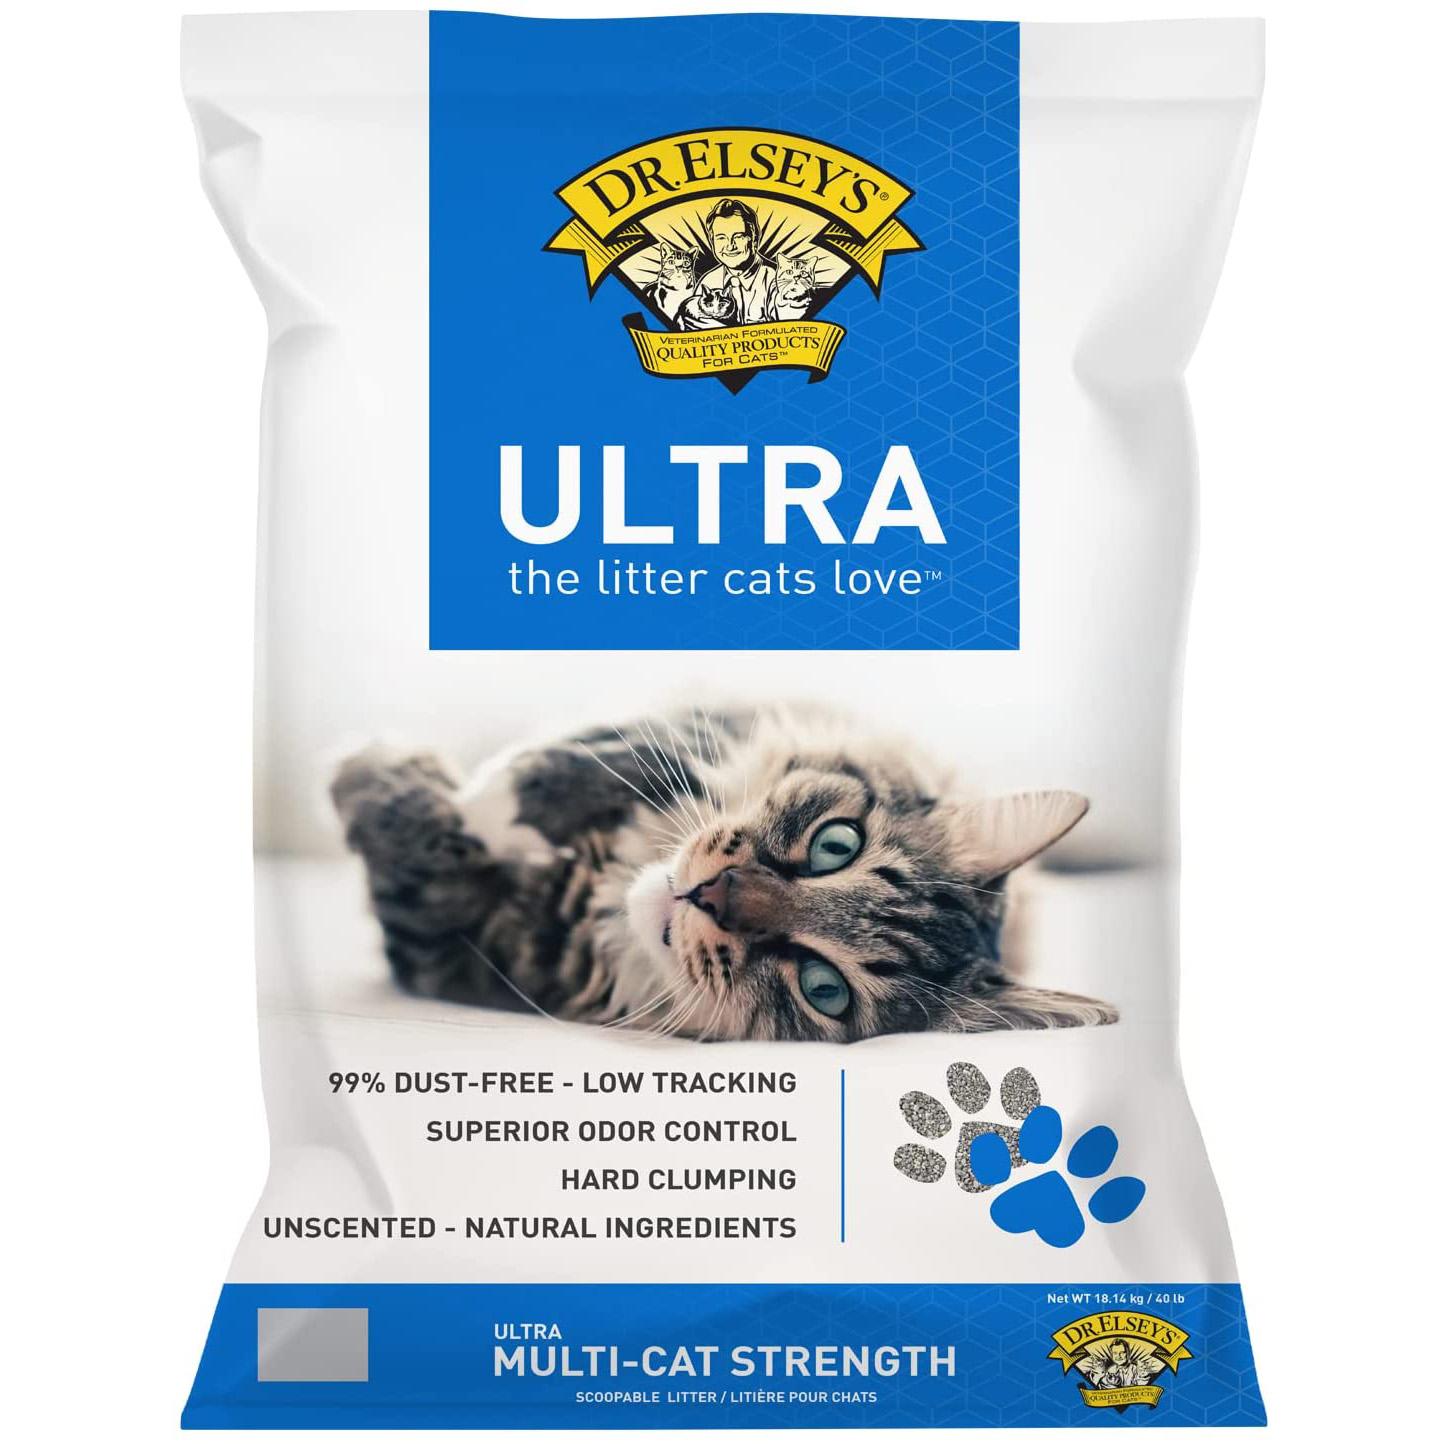 Precious Cat Unscented Ultra Clumping Cat Litter for $11.98 Shipped